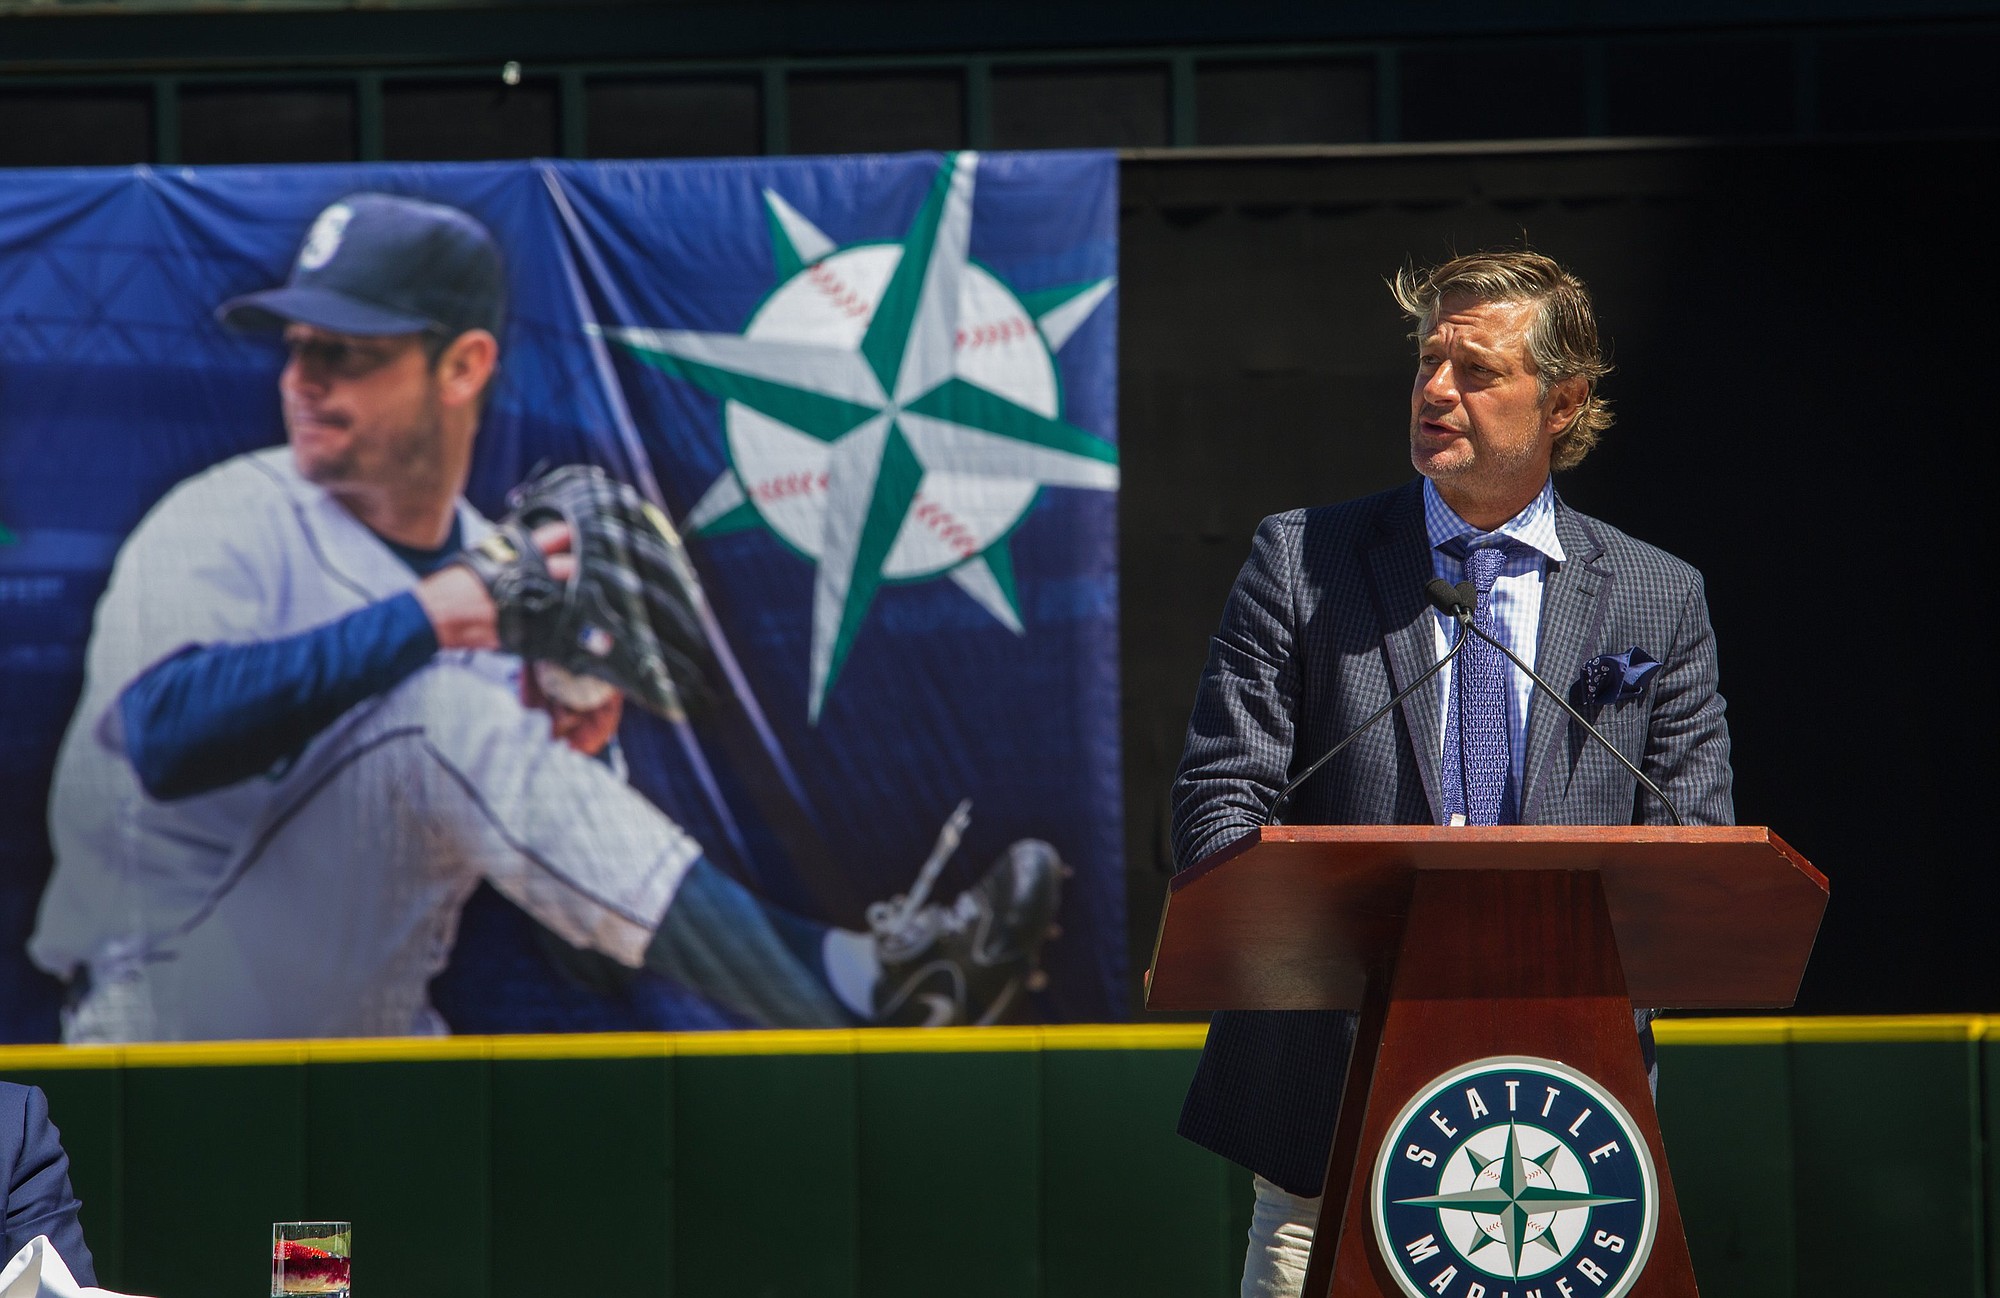 Longtime pitcher Jamie Moyer entering Mariners Hall of Fame - The Columbian